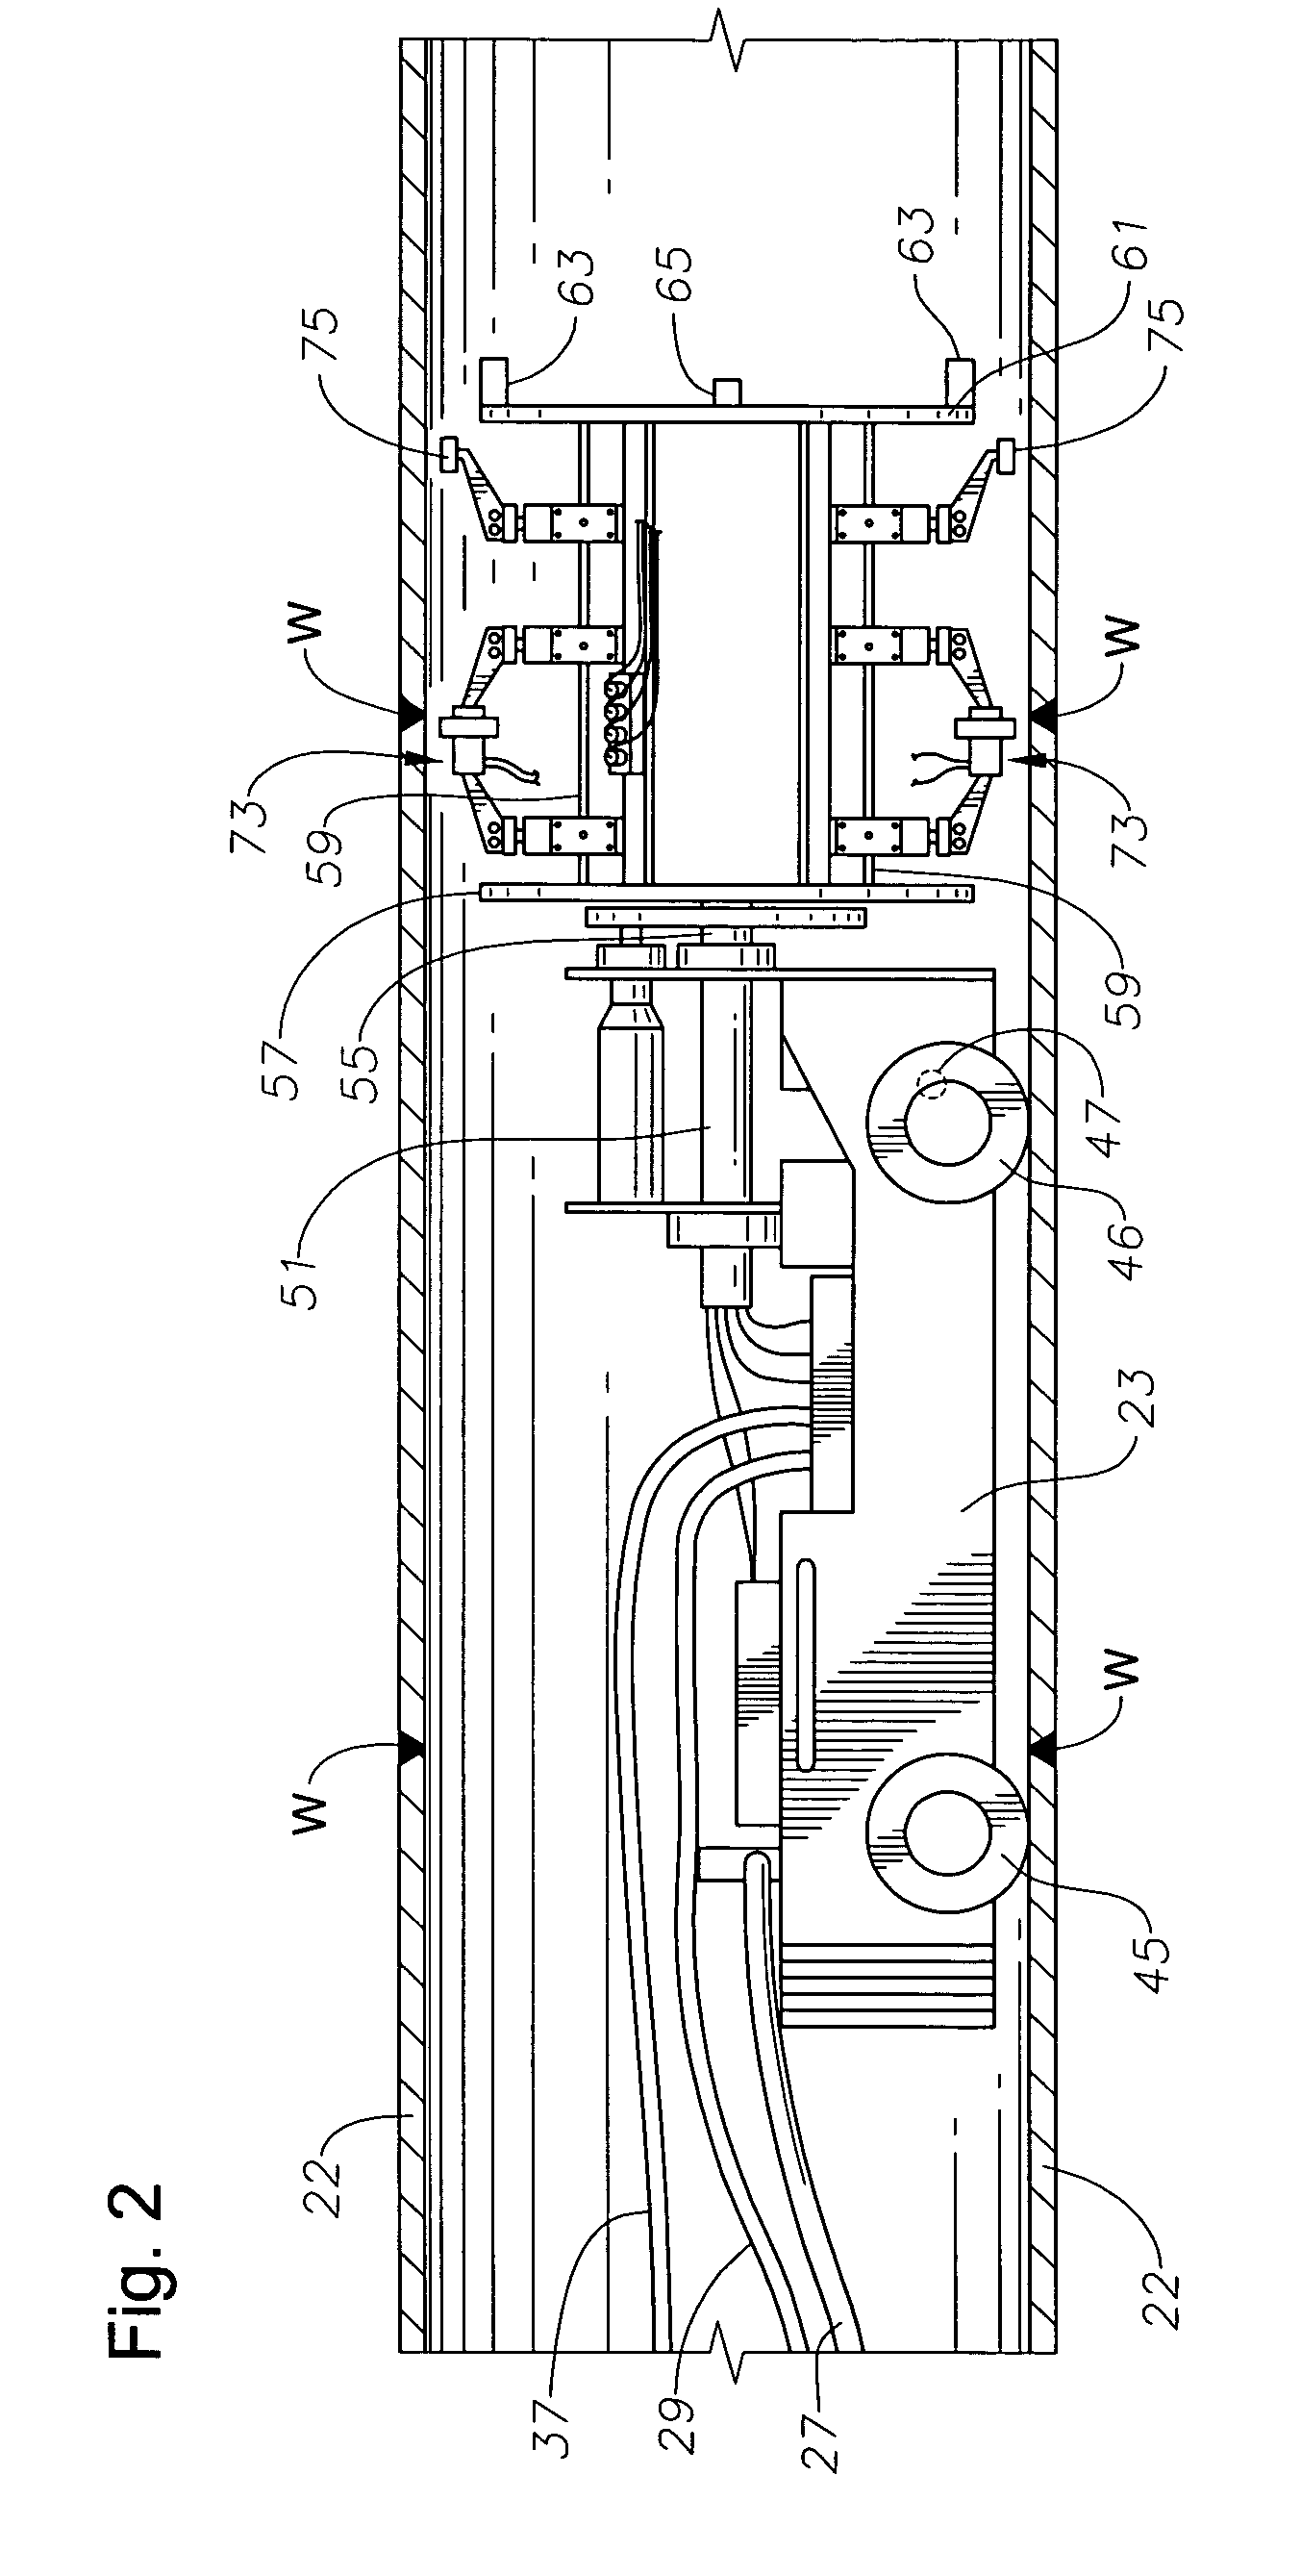 Internal riser inspection system, apparatus and methods of using same